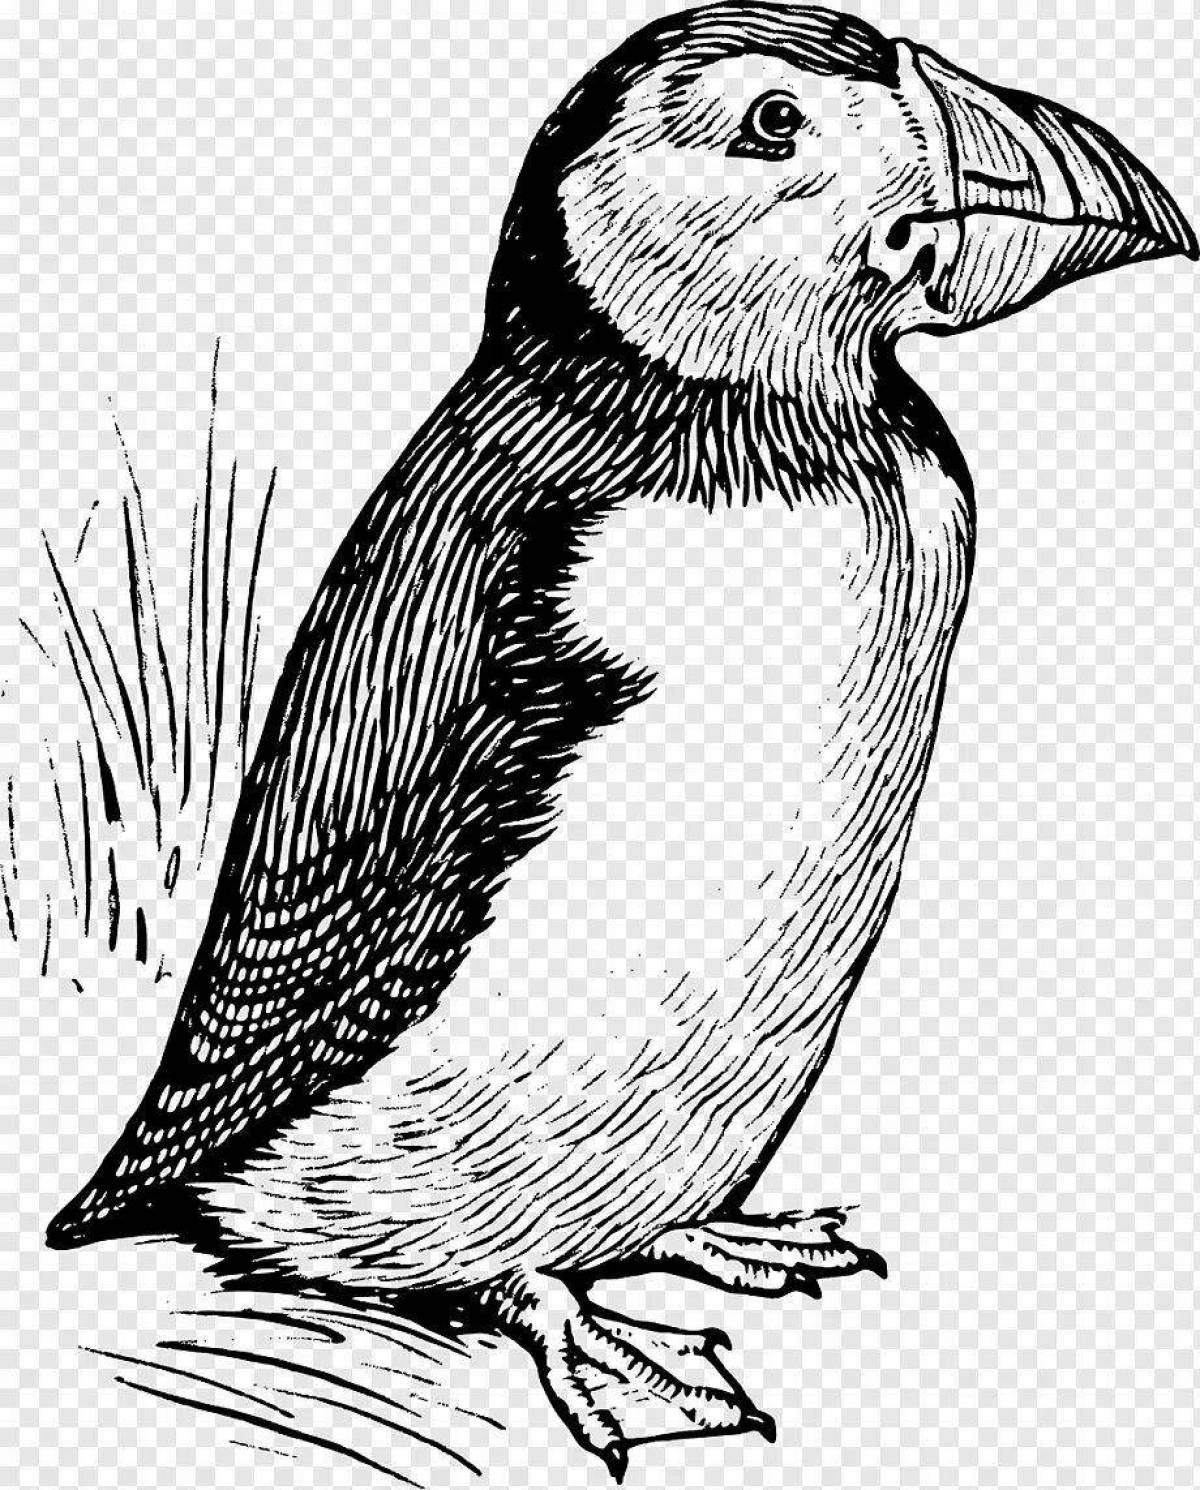 Coloring page graceful puffin bird